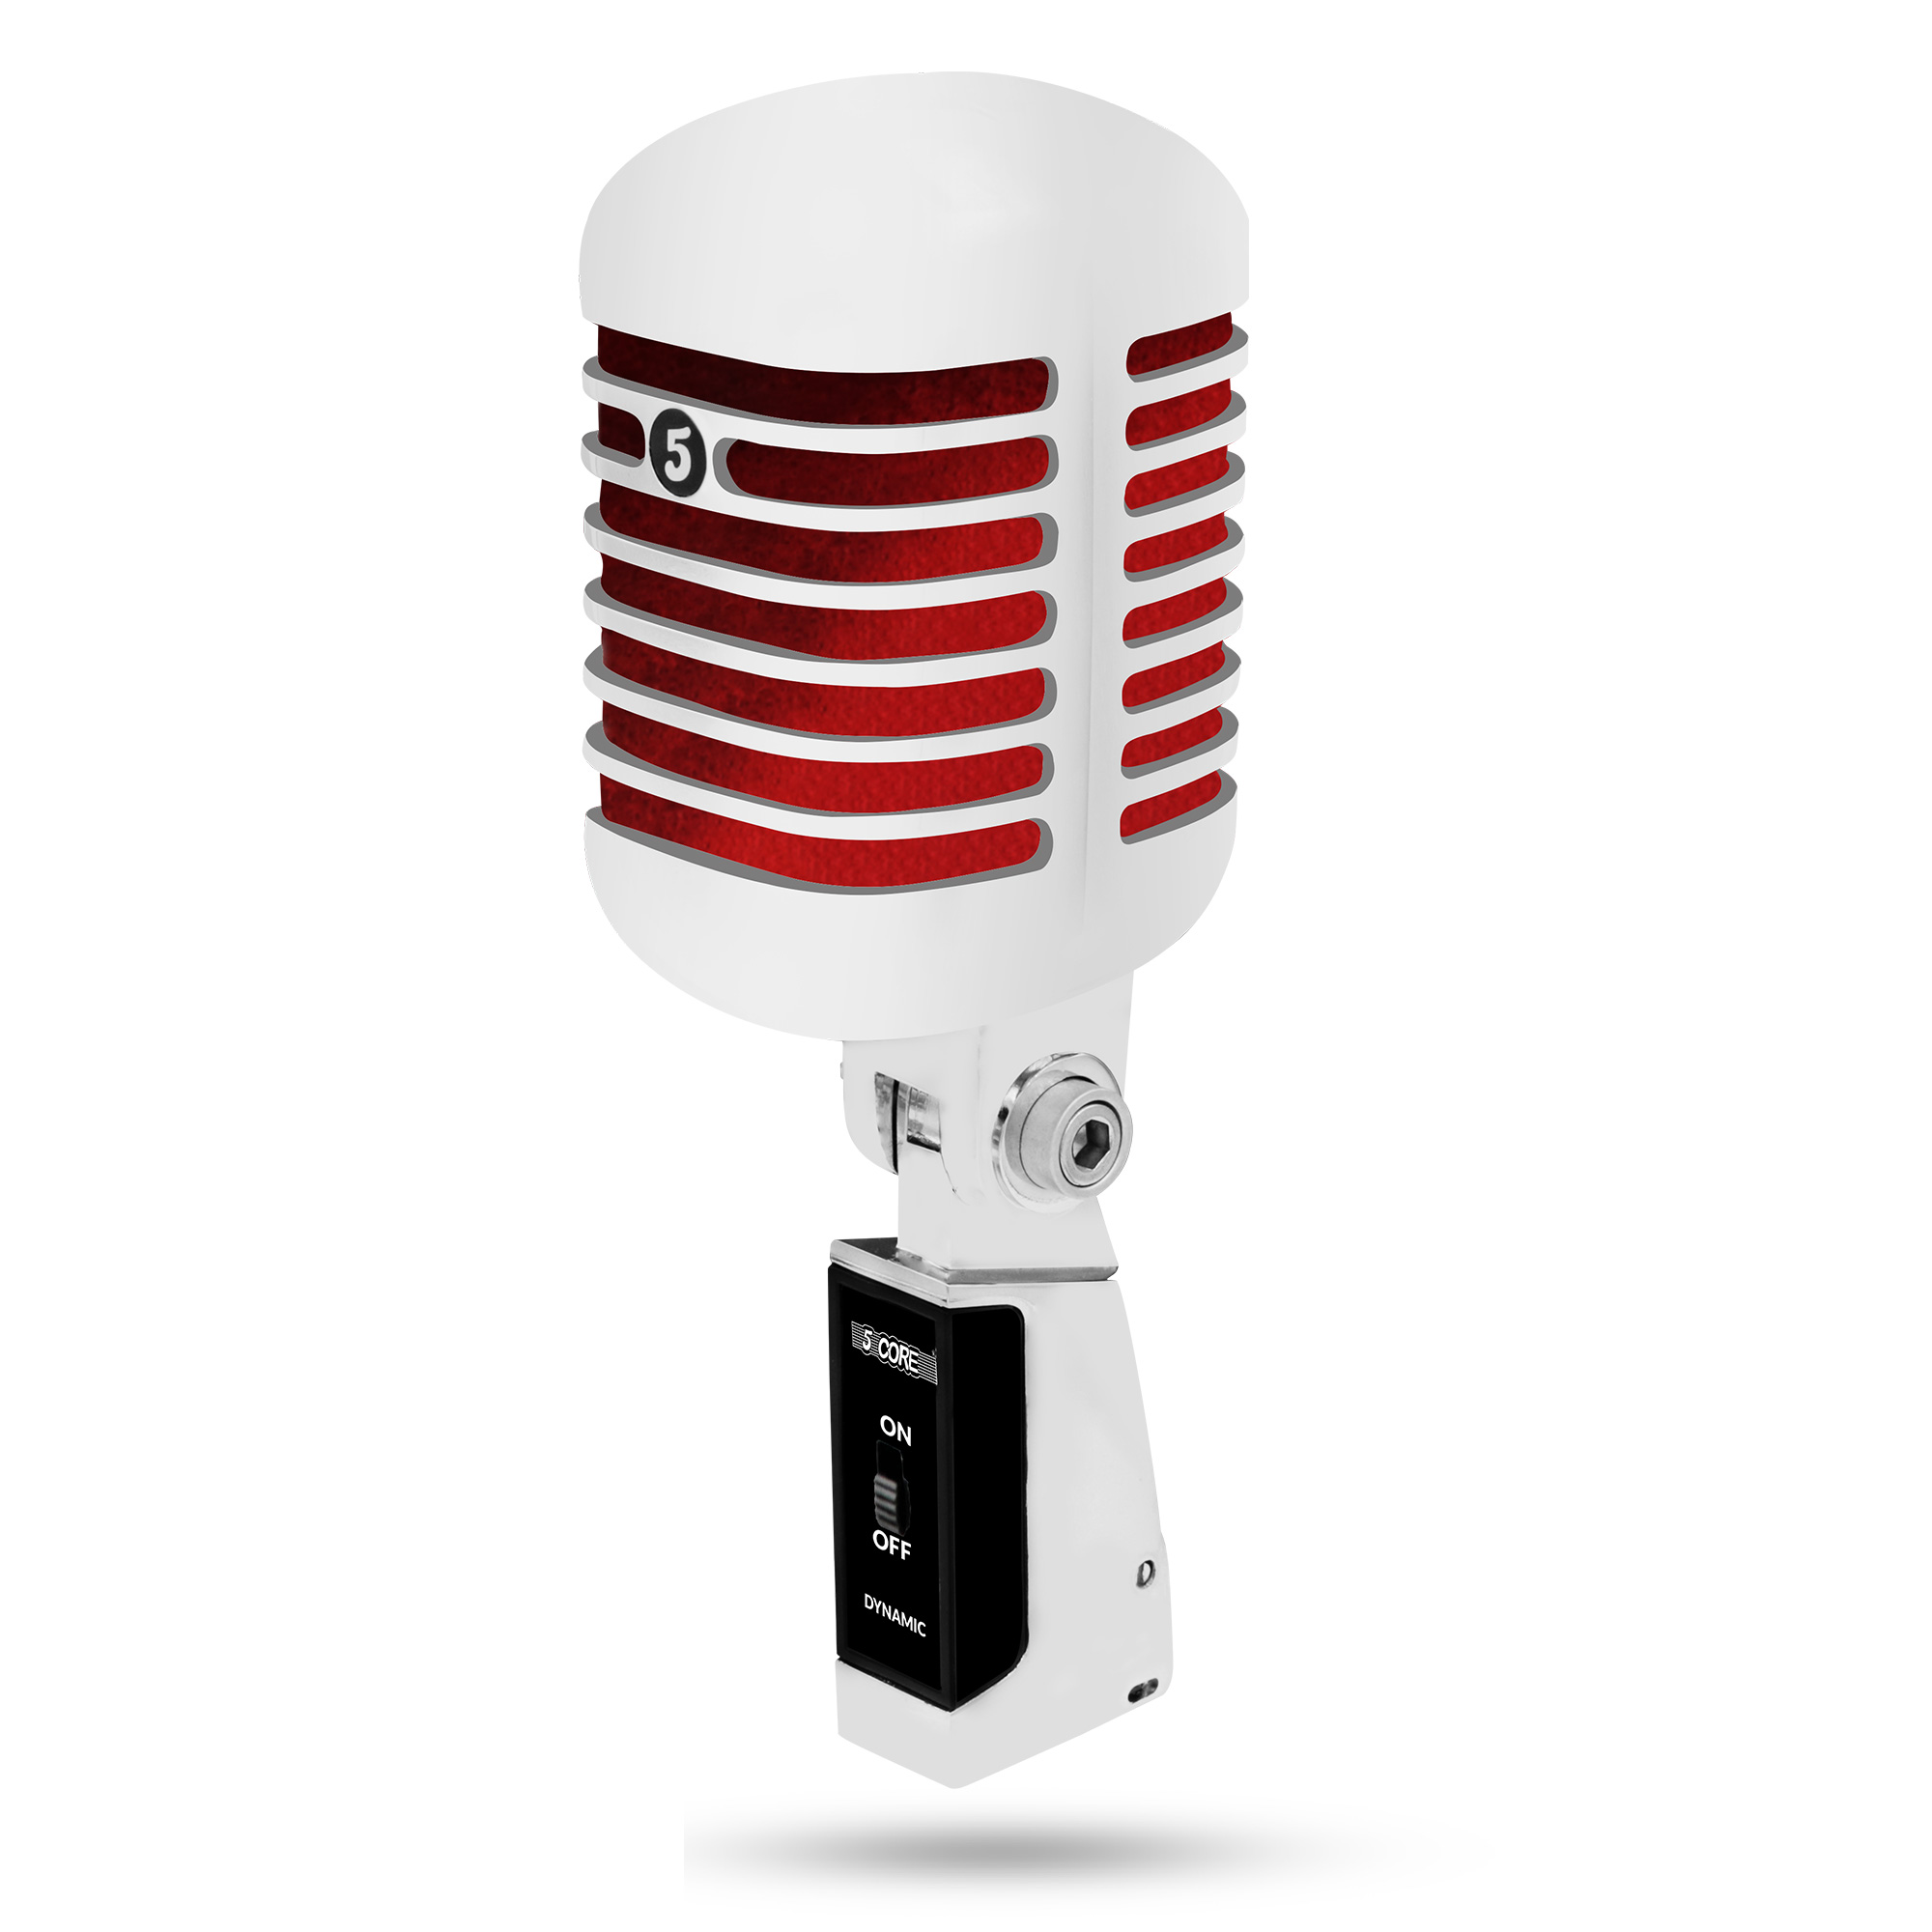 the part number is RTRO MIC CH RED